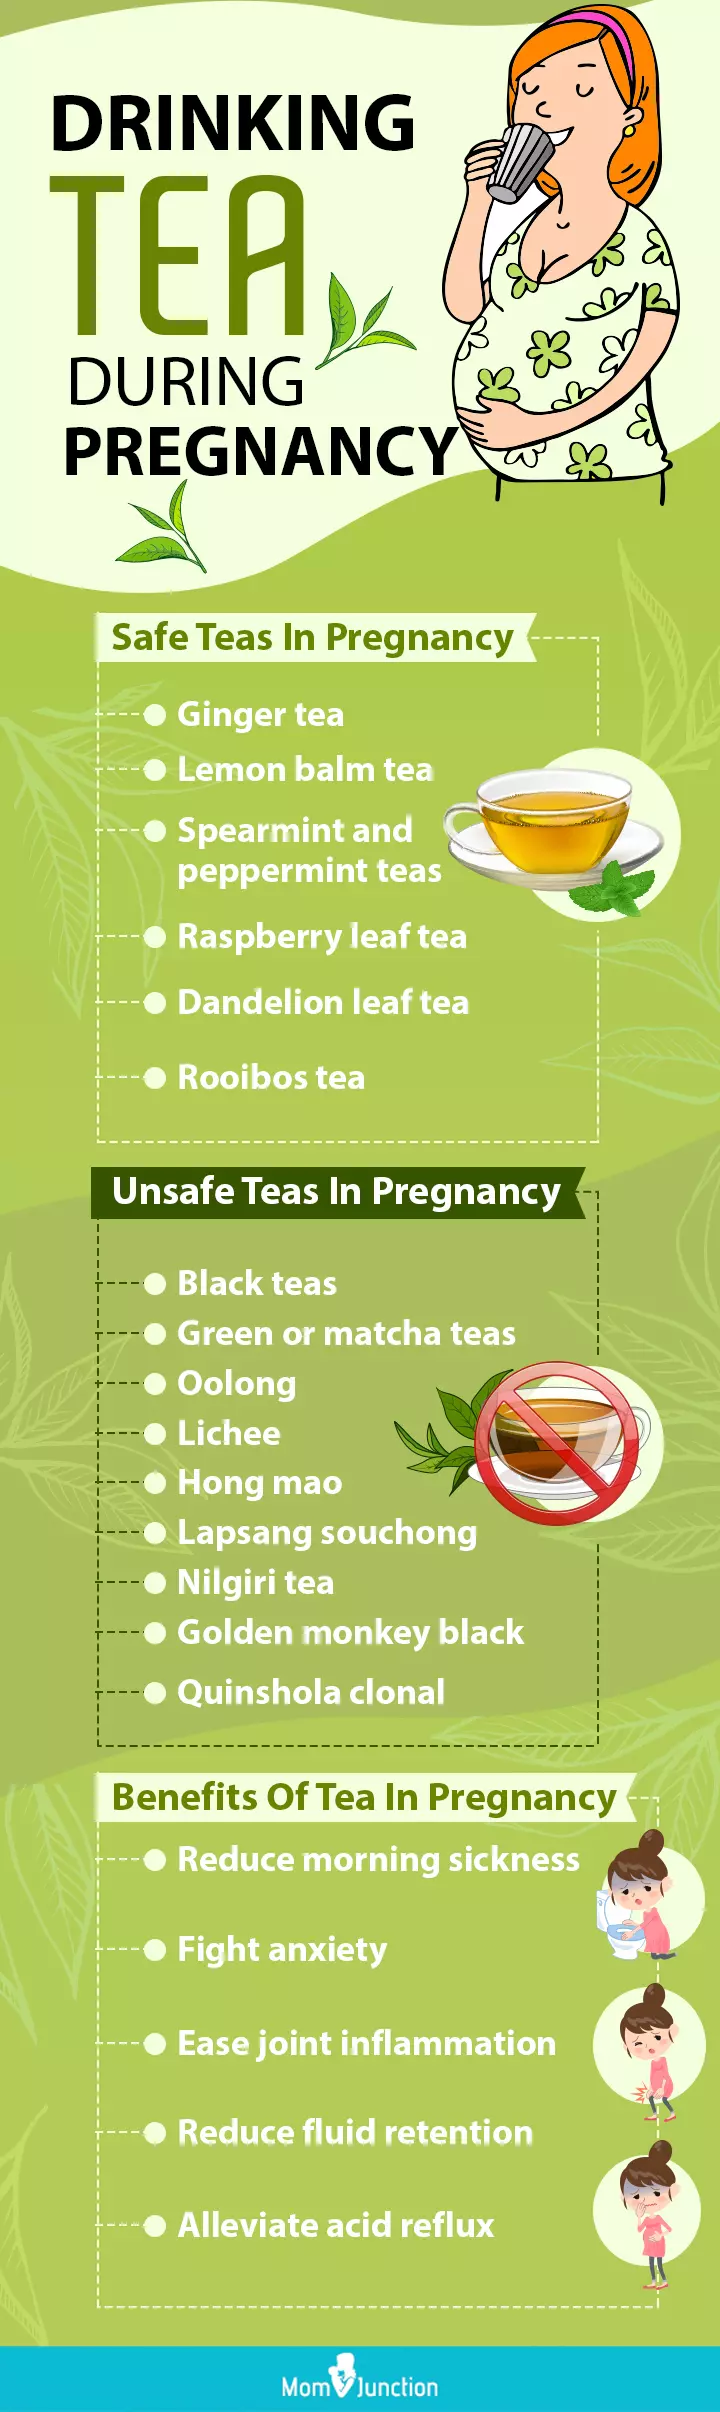 safe unsafe teas during in pregnancy (Infographic)